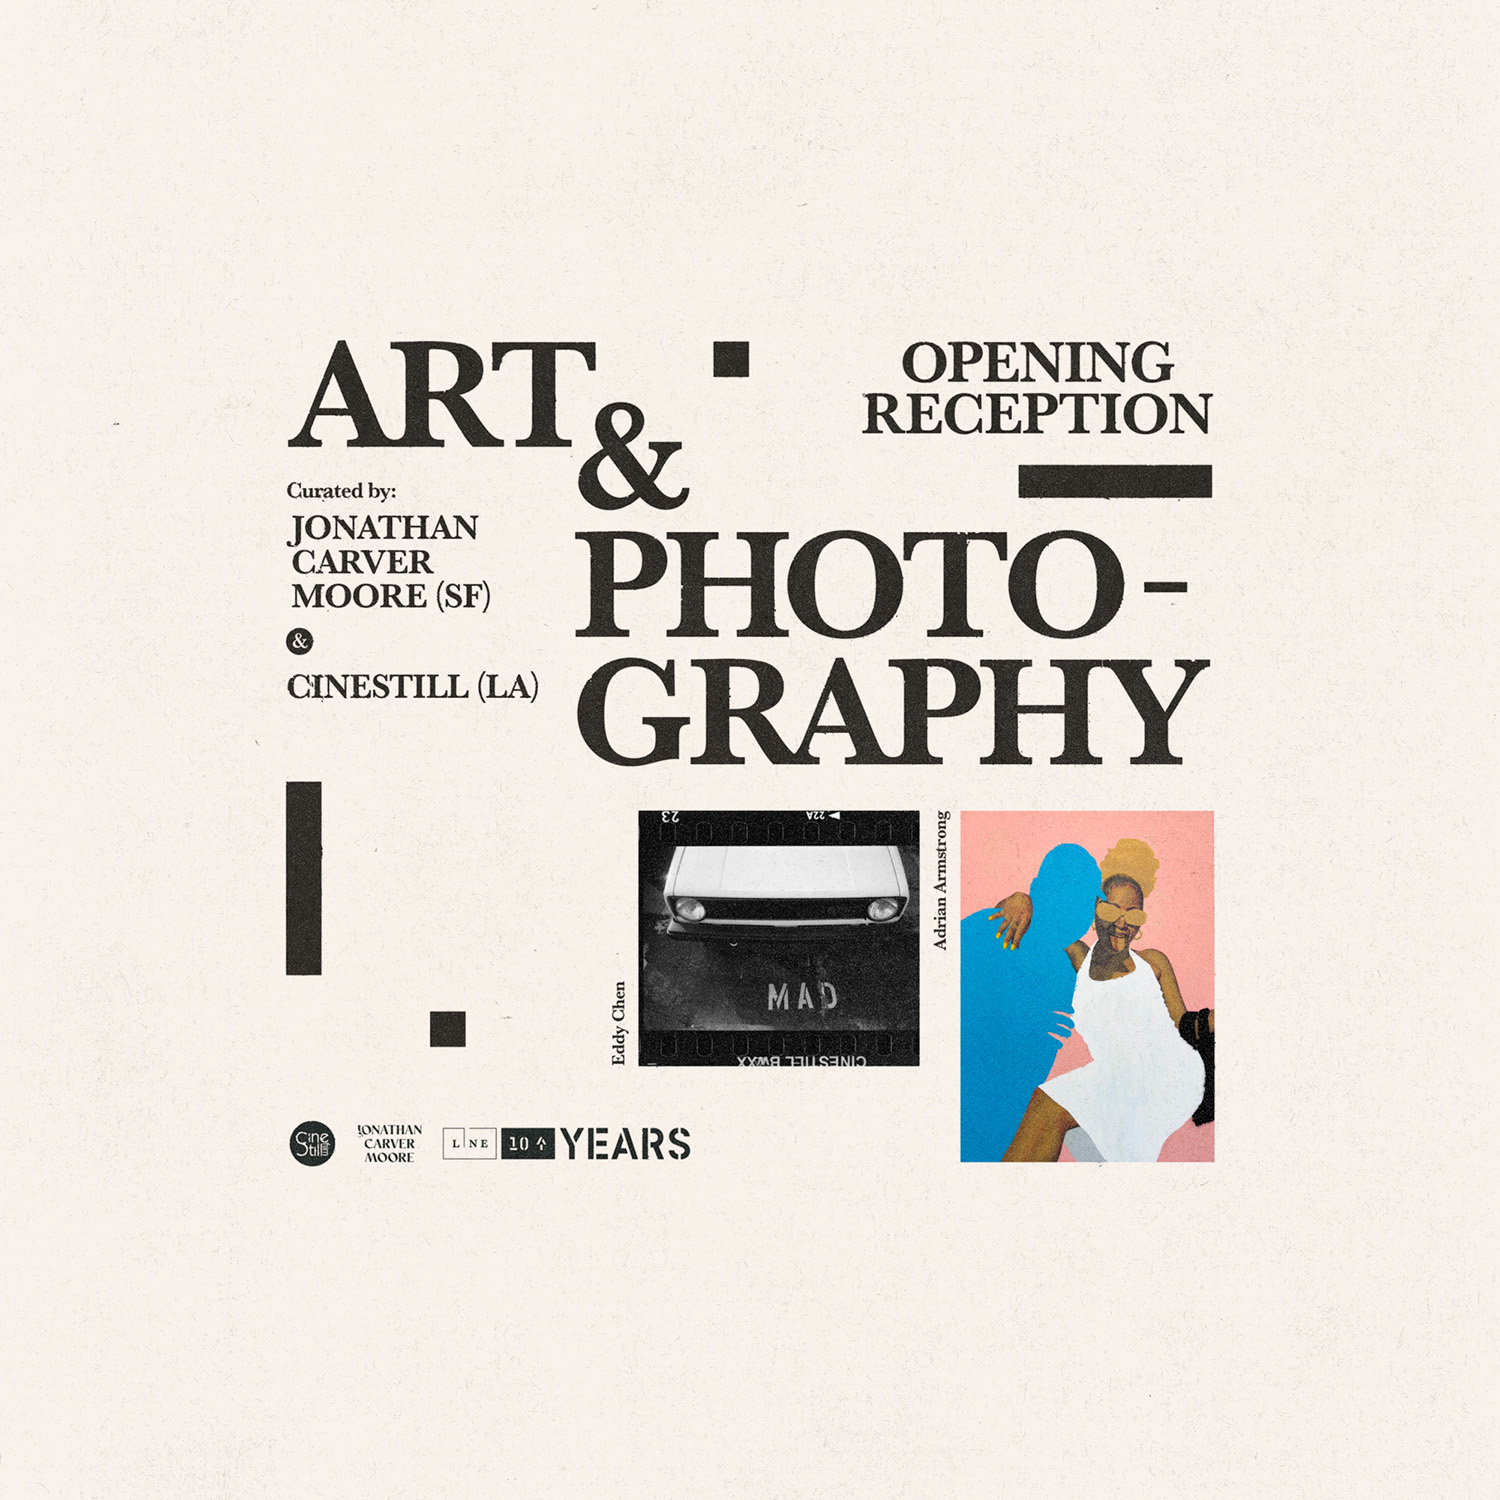 A poster to Art & Photography Opening Reception, Curated by Jonathan Carver Moore & CineStill, on May 17th at the LINE LA.